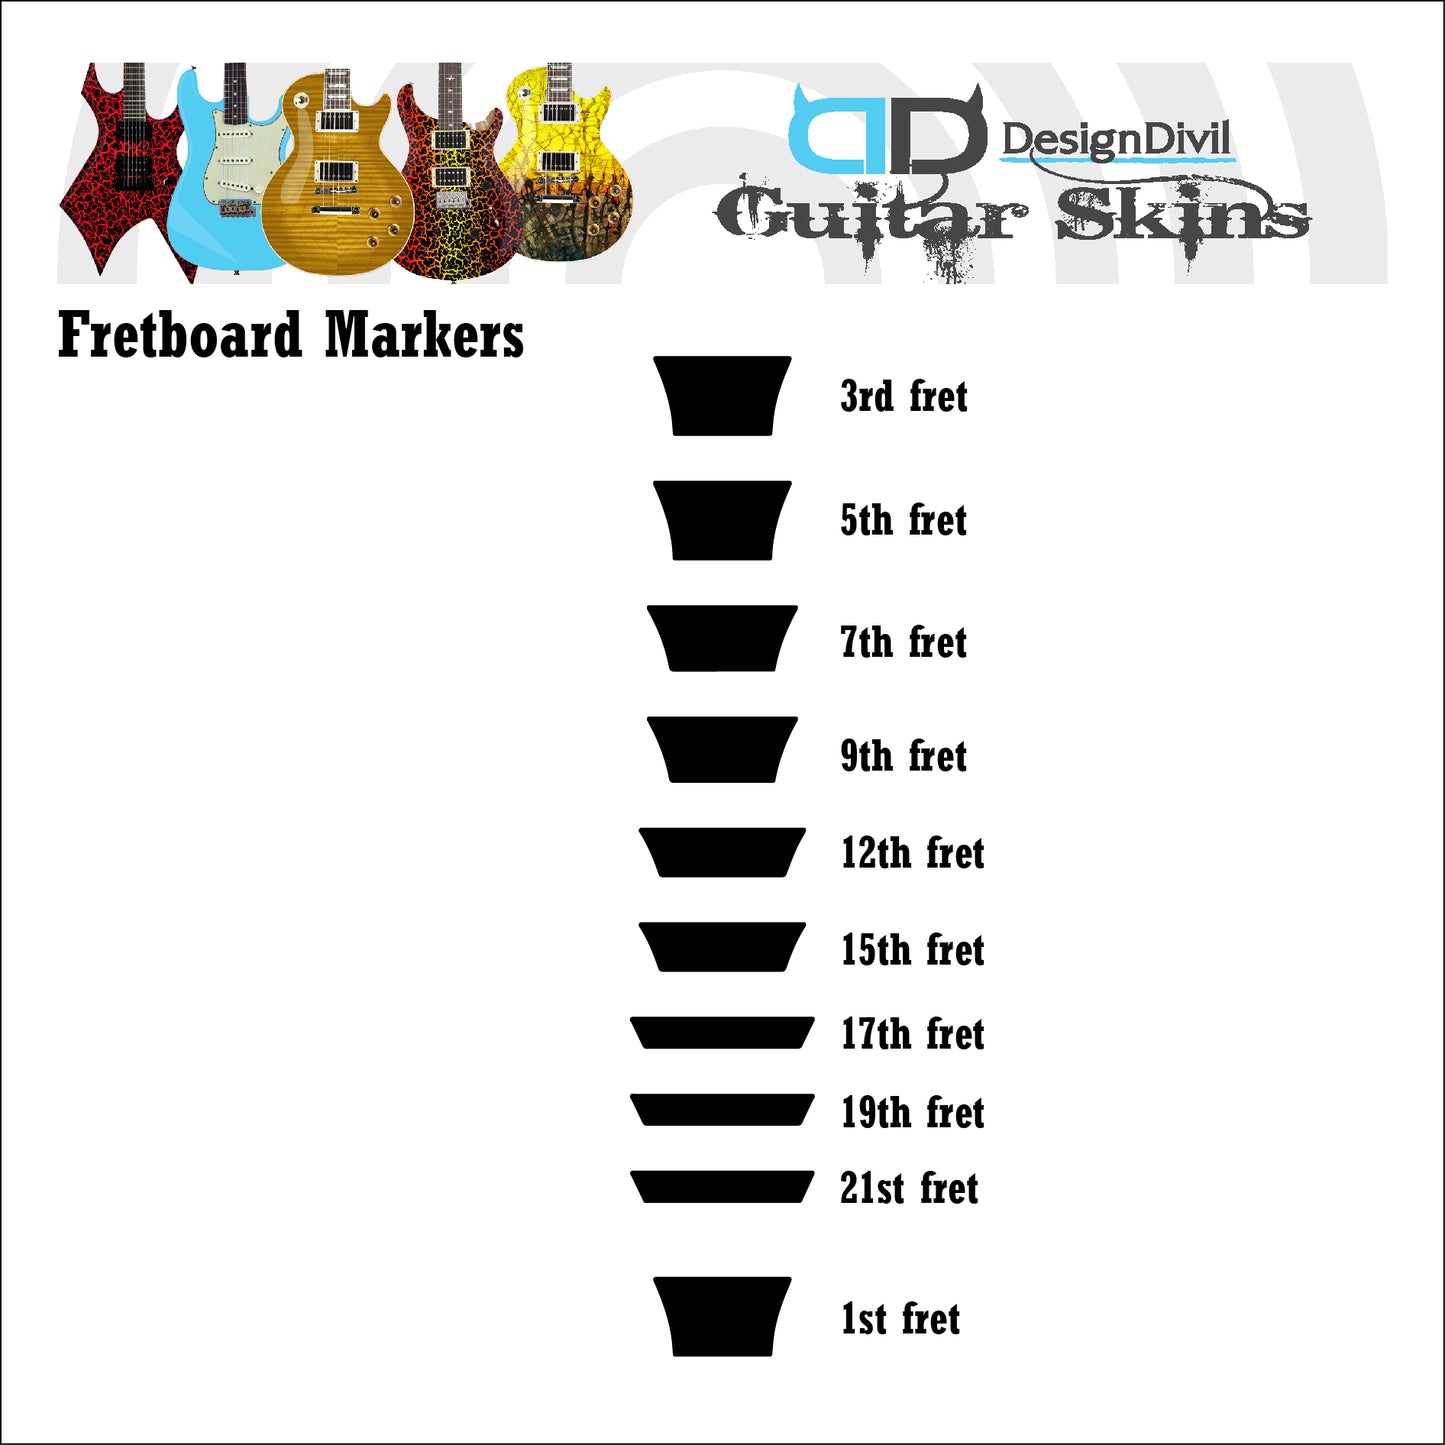 Customized Trapezoid Inlays Decal Stickers for Guitars & Basses 8 Colour Options.